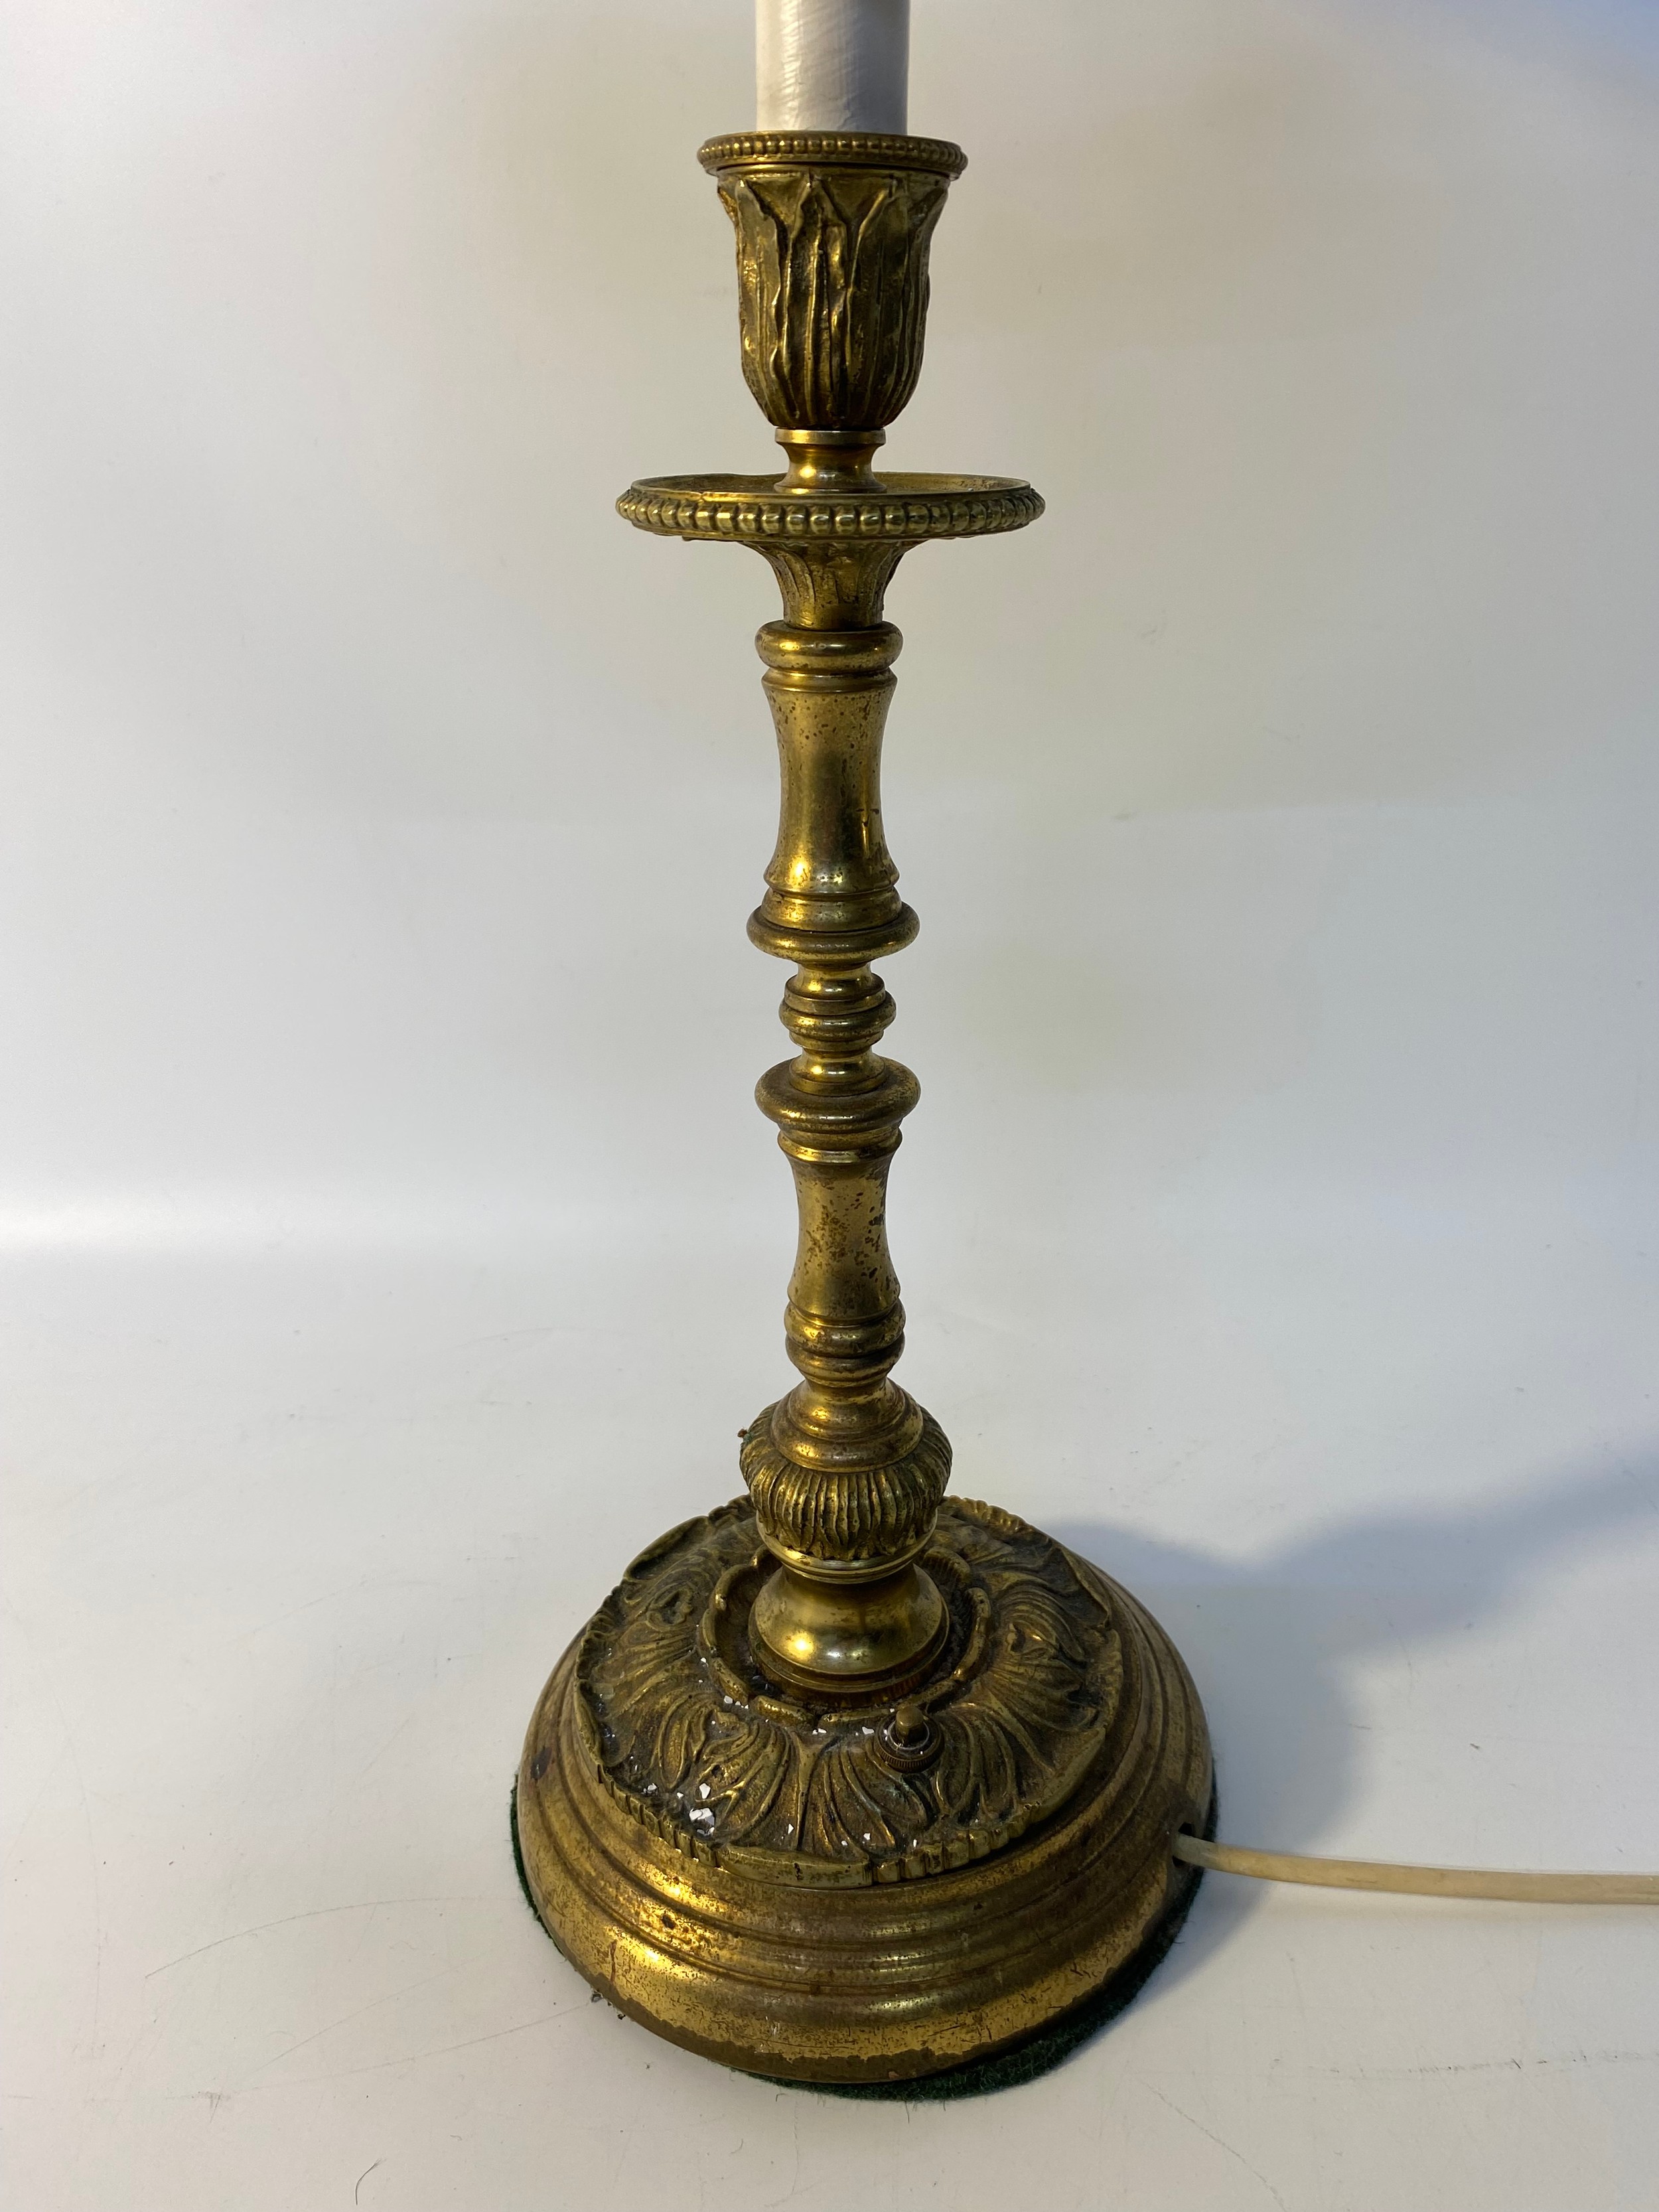 20th century brass desk table lamp with enamel shade [66cm] - Image 2 of 4